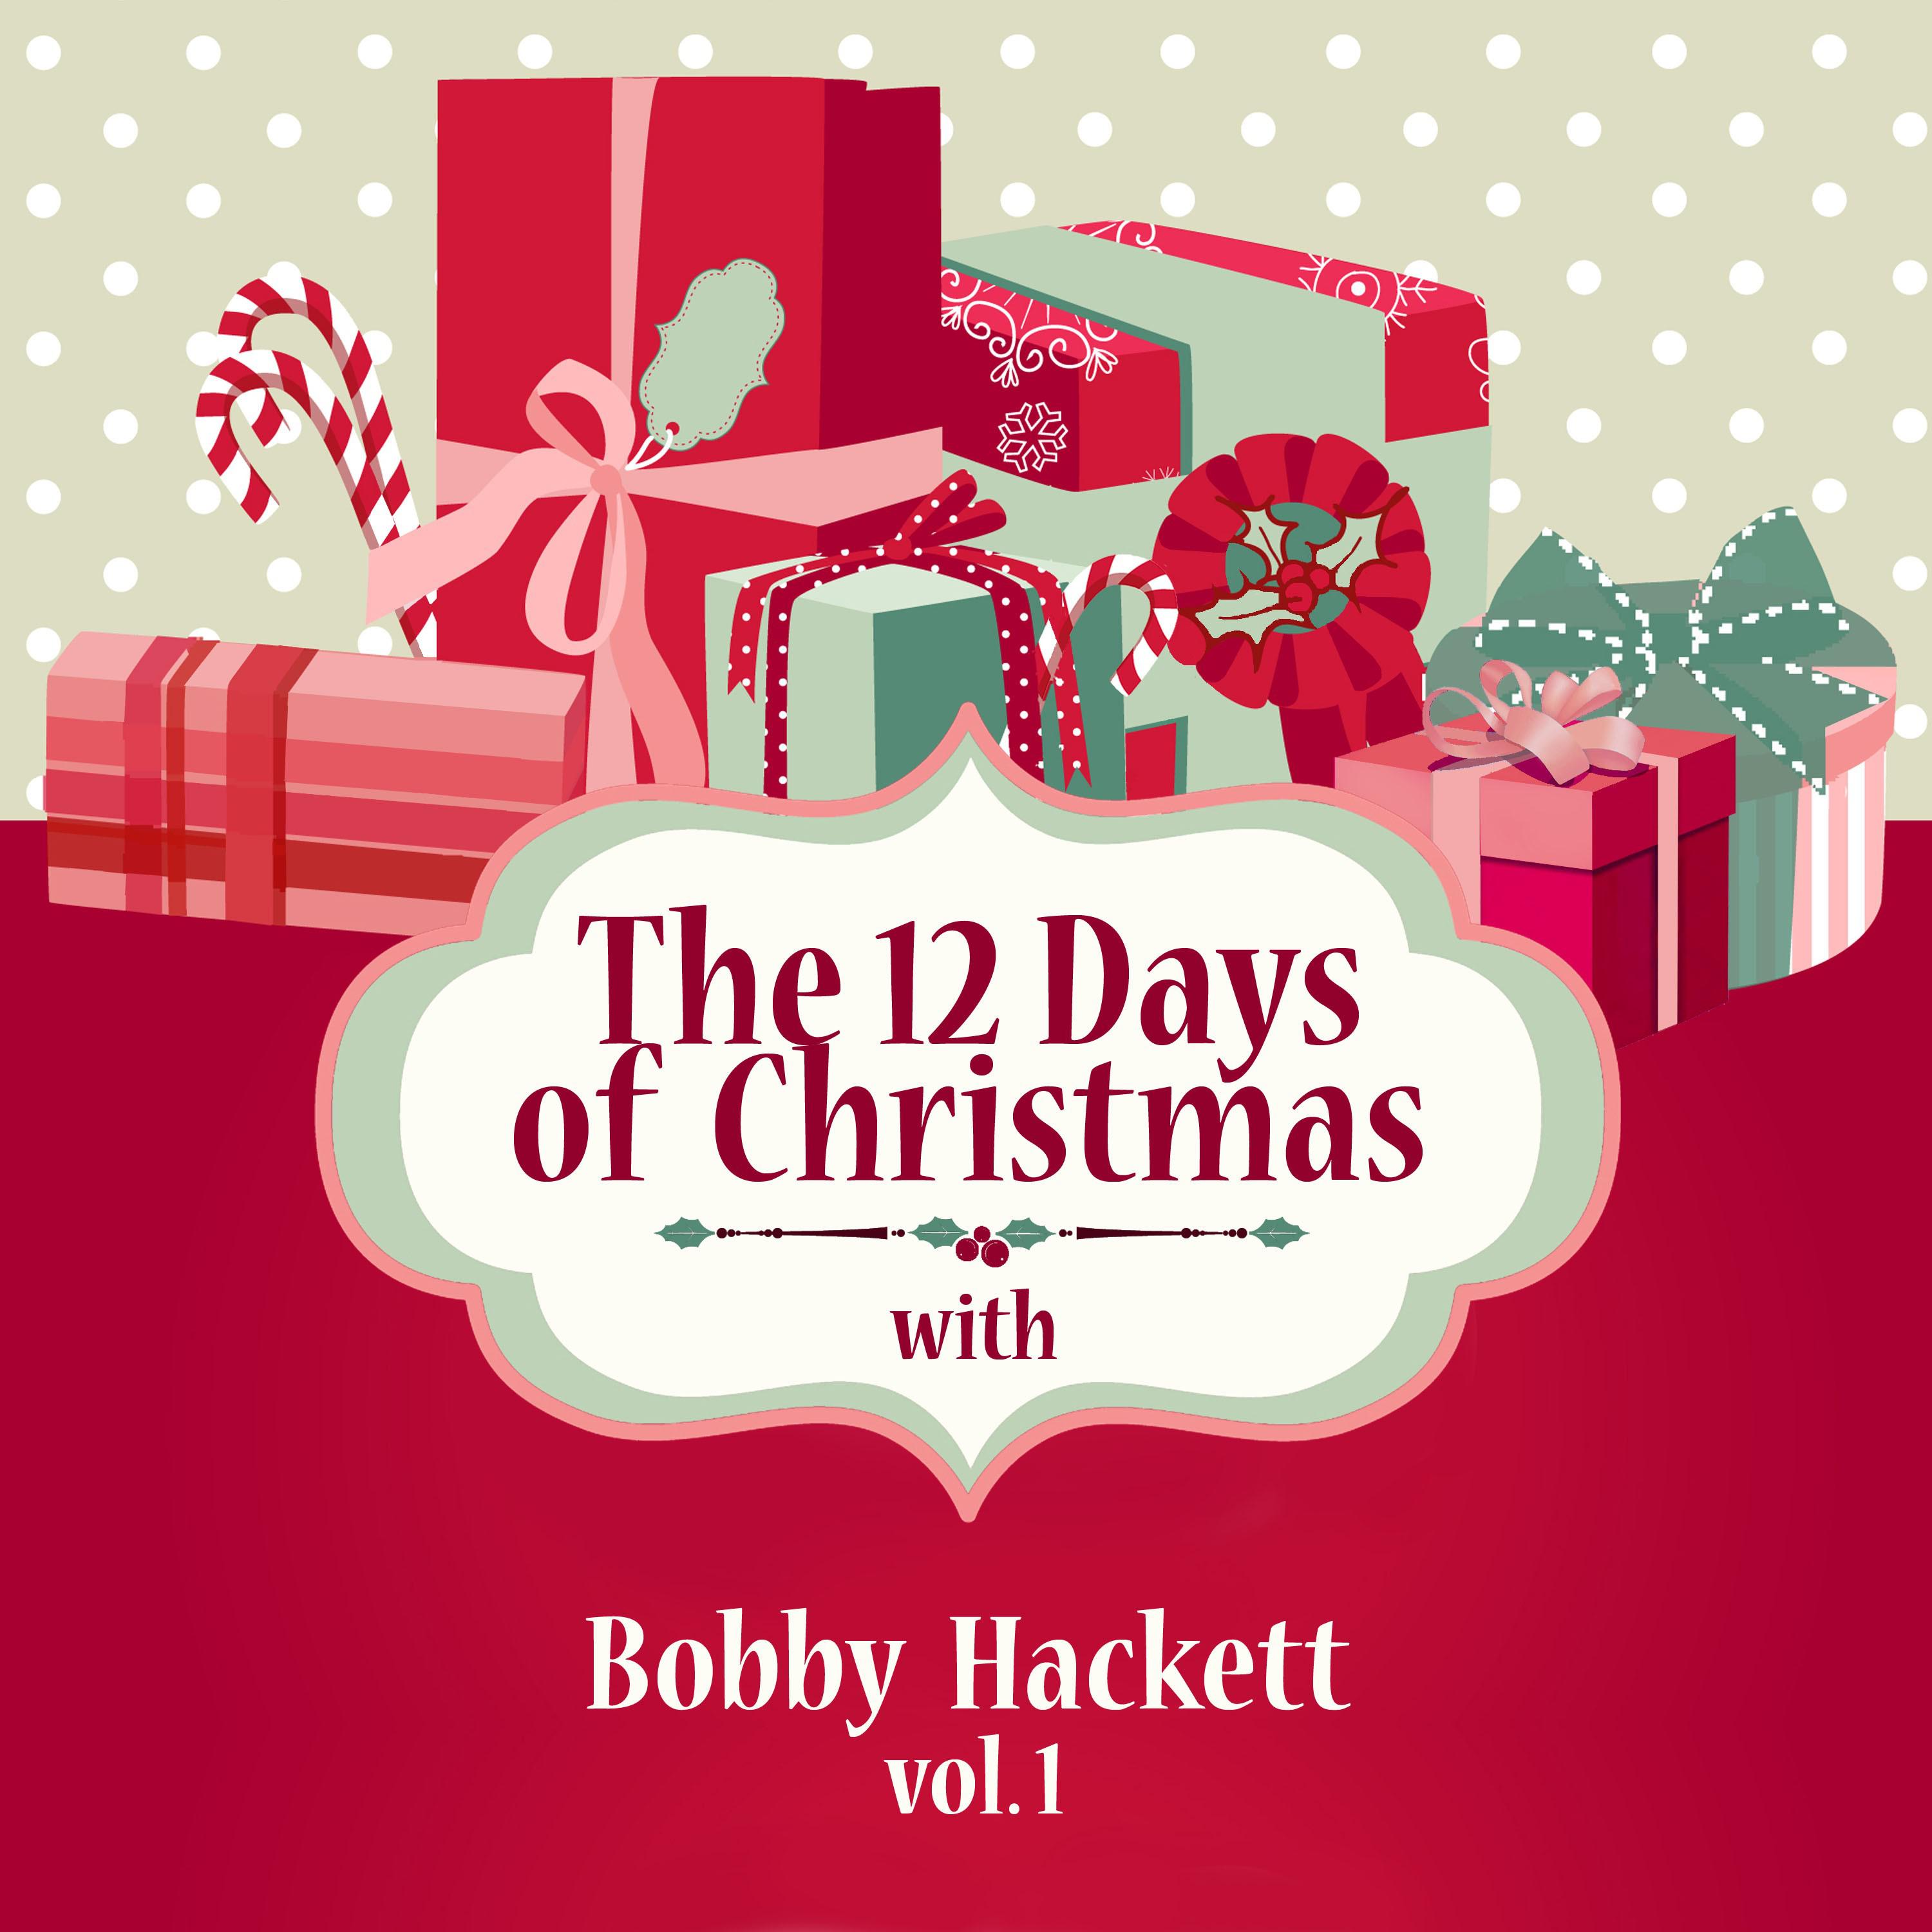 The 12 Days of Christmas with Bobby Hackett, Vol. 1